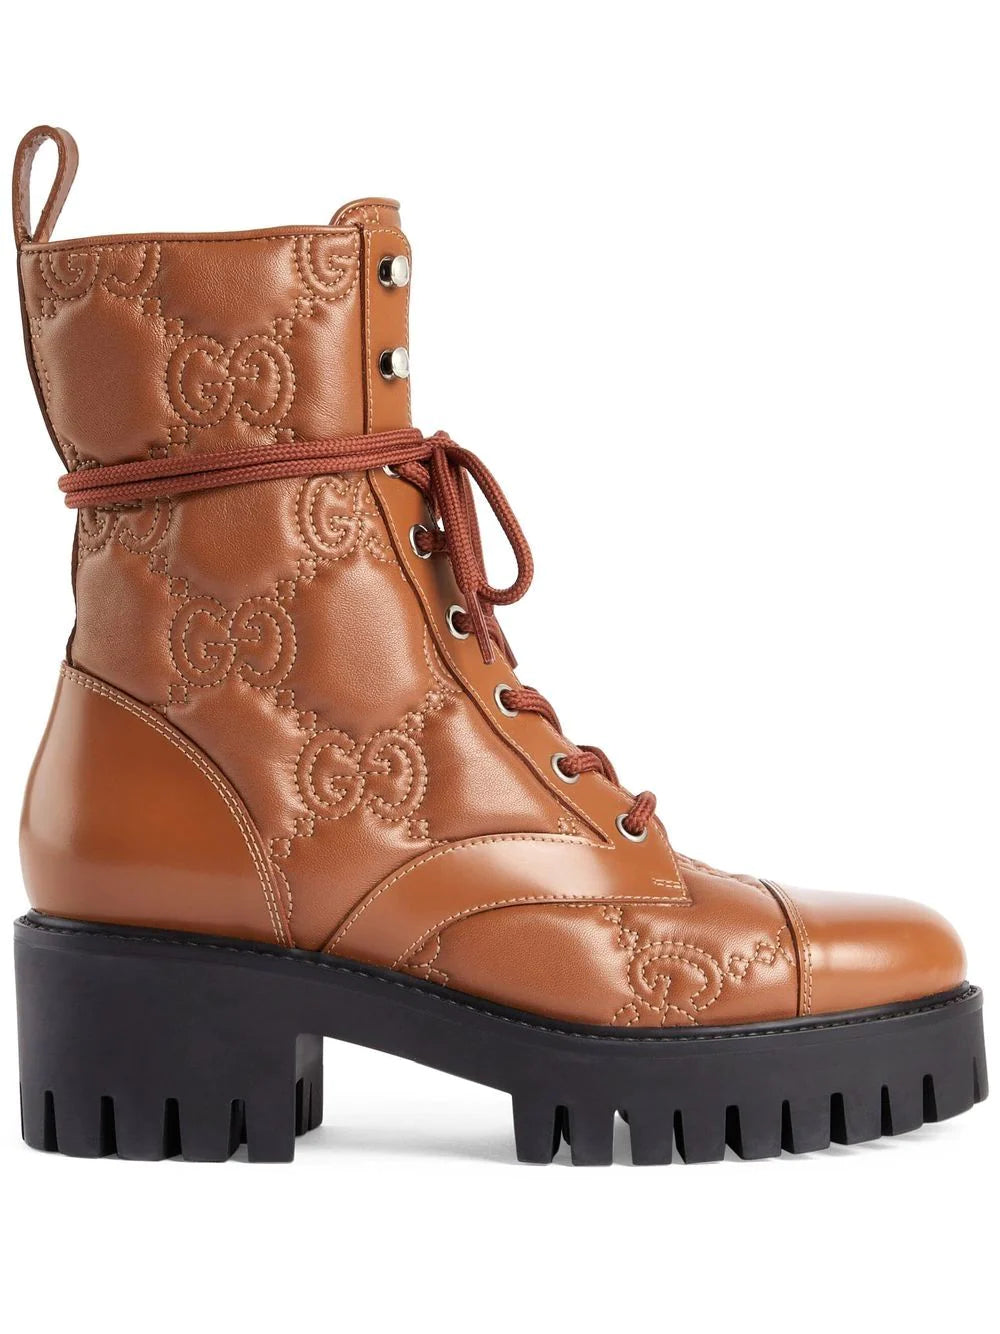 Gucci GG quilted ankle boots - Joseph